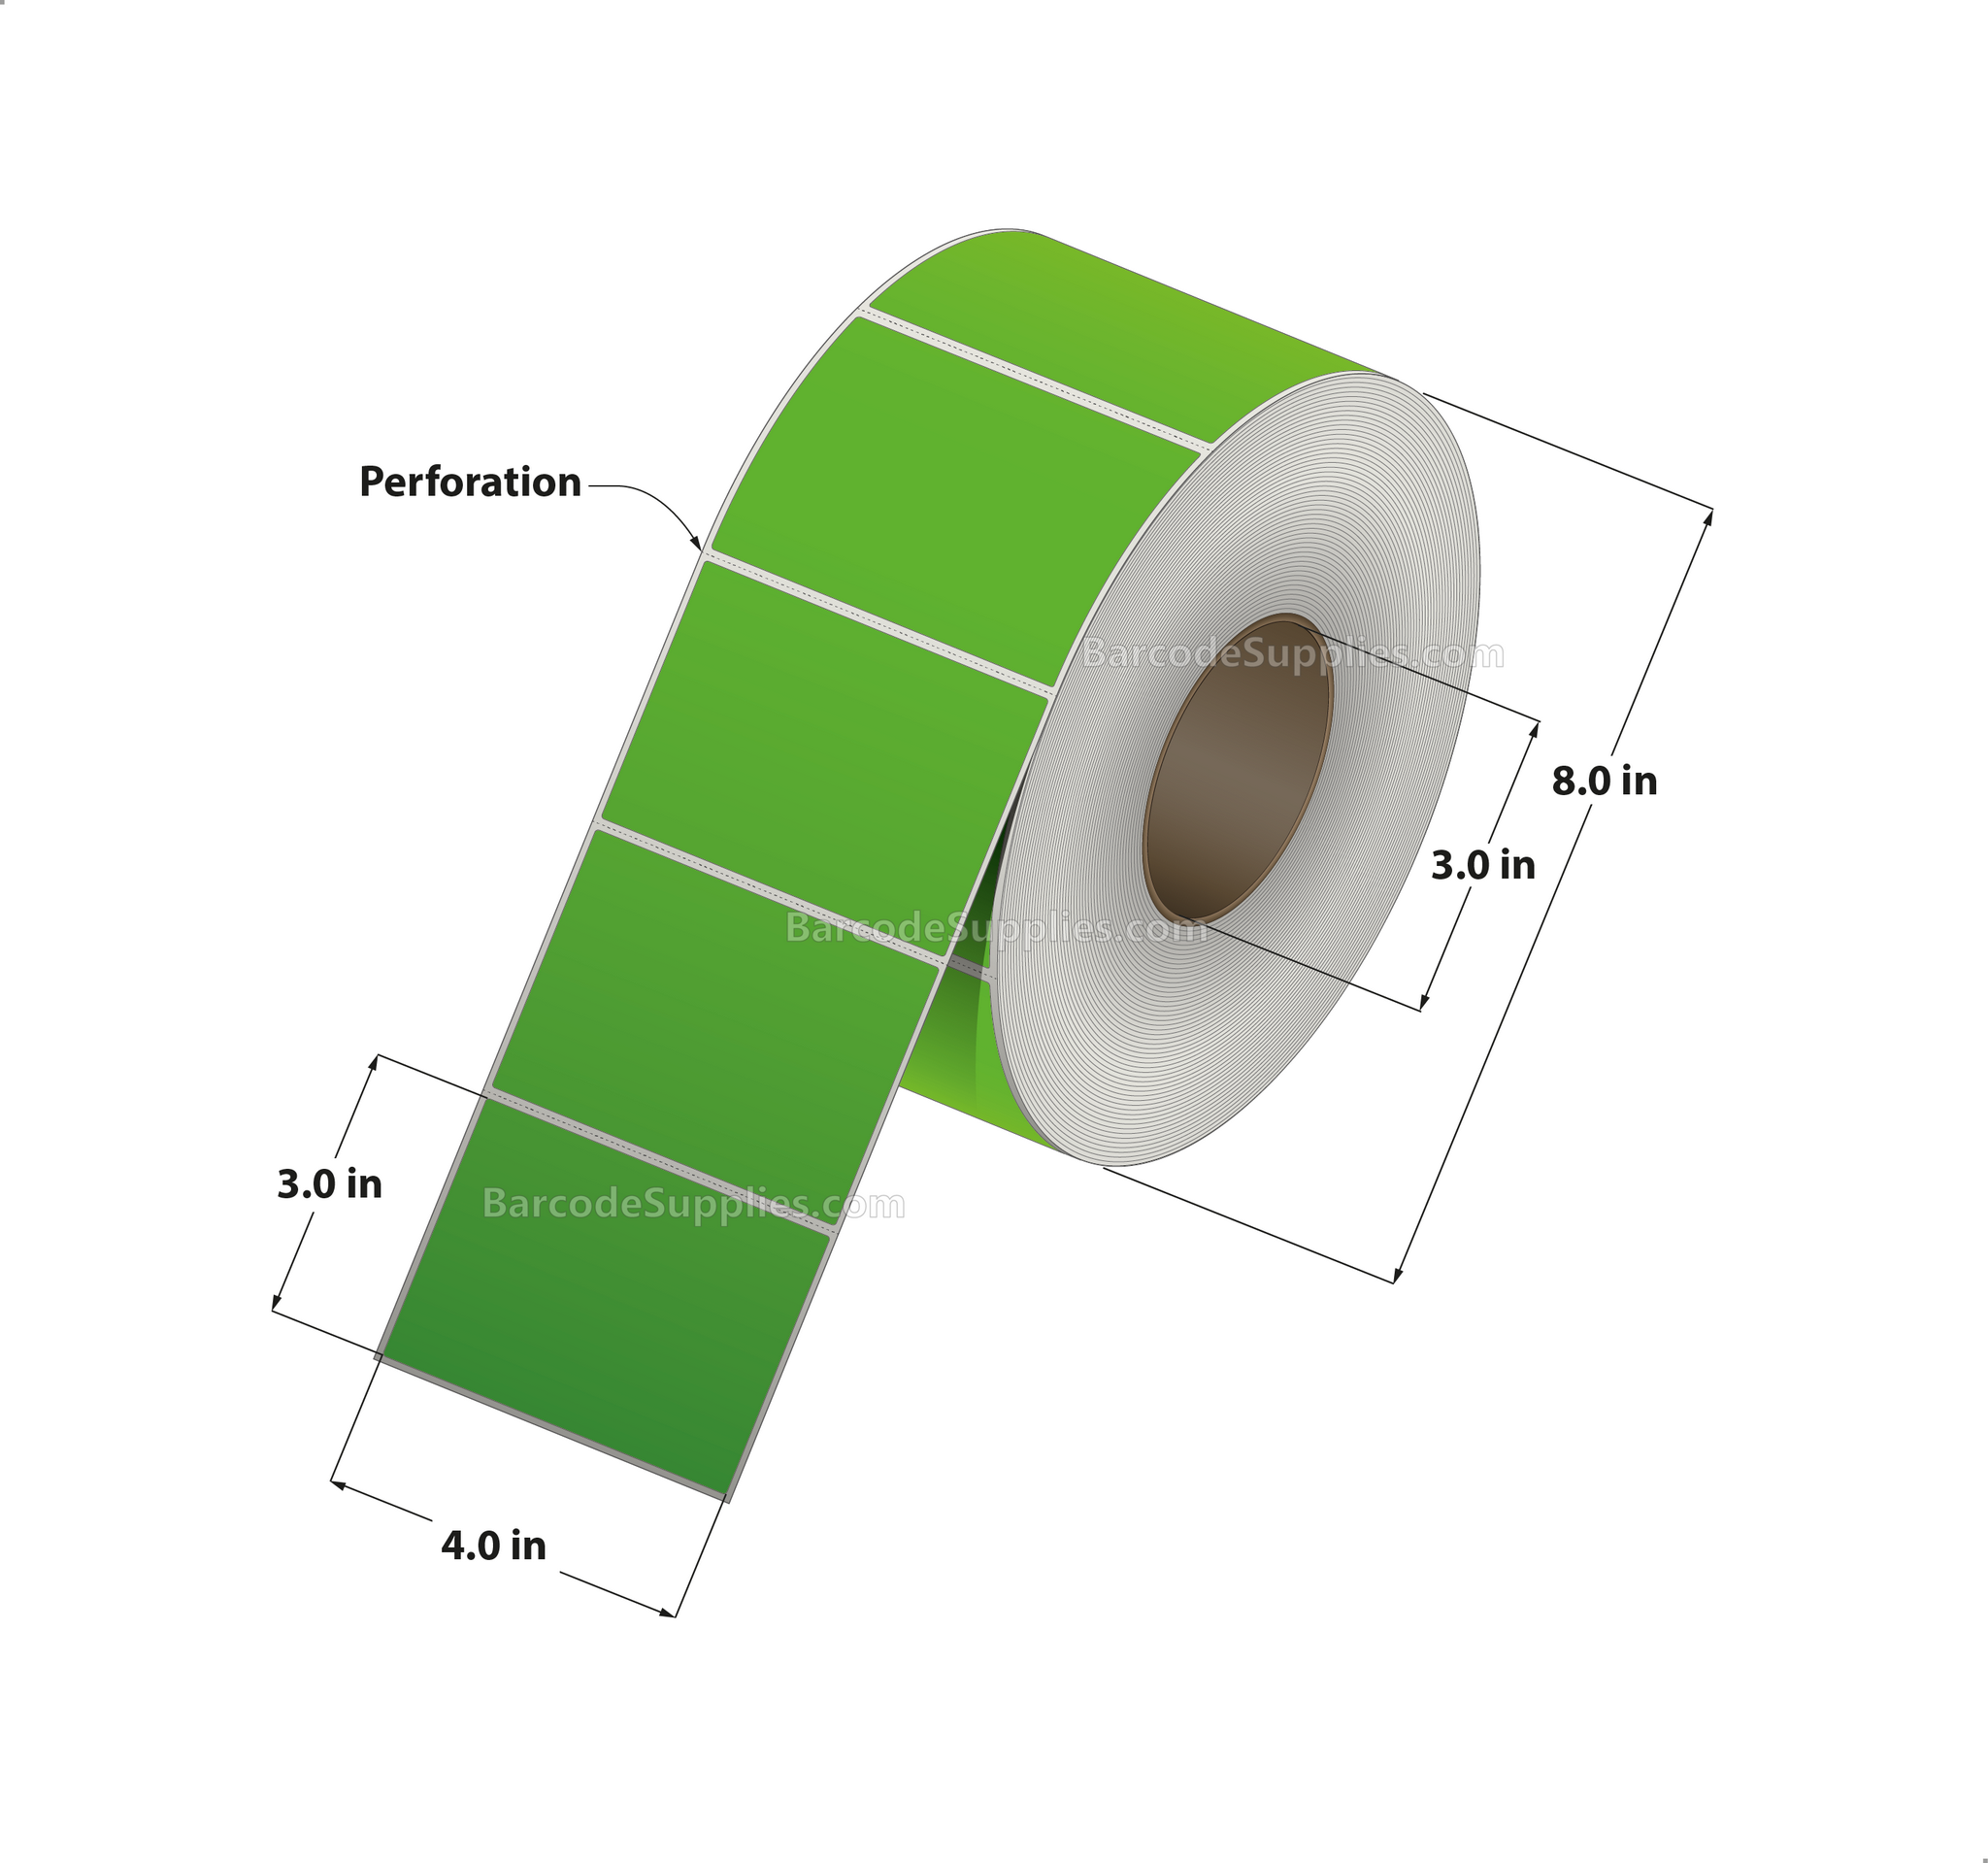 4 x 3 Thermal Transfer Fluorescent Green Labels With Permanent Acrylic Adhesive - Perforated - 1900 Labels Per Roll - Carton Of 4 Rolls - 7600 Labels Total - MPN: TH43-1PFG